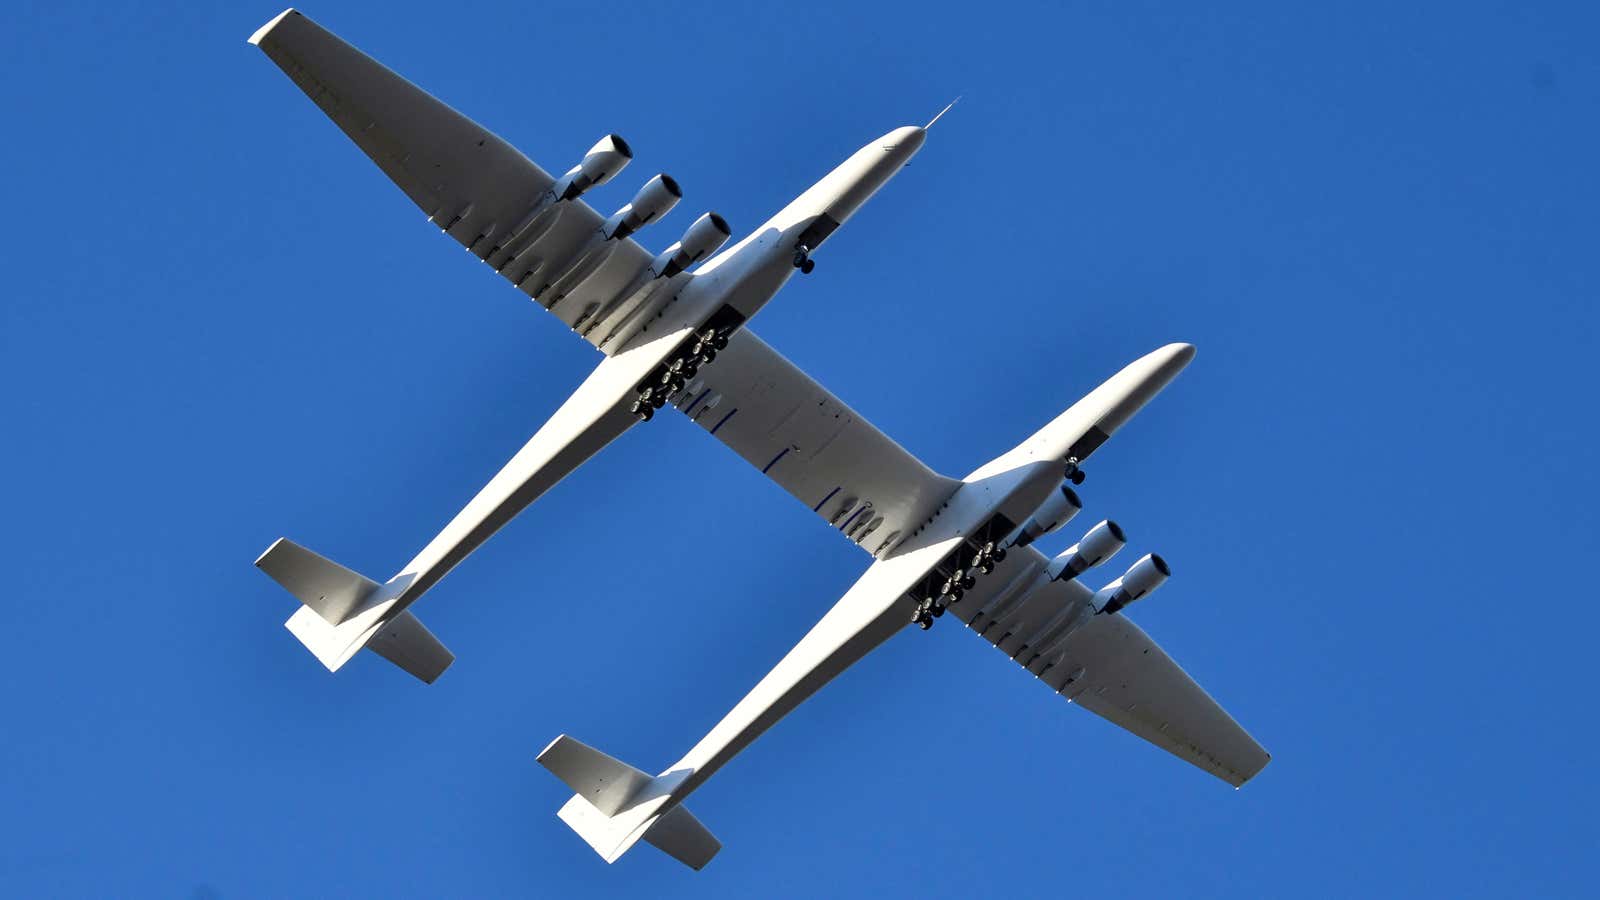 Stratolaunch Systems flies into the aviation history books.